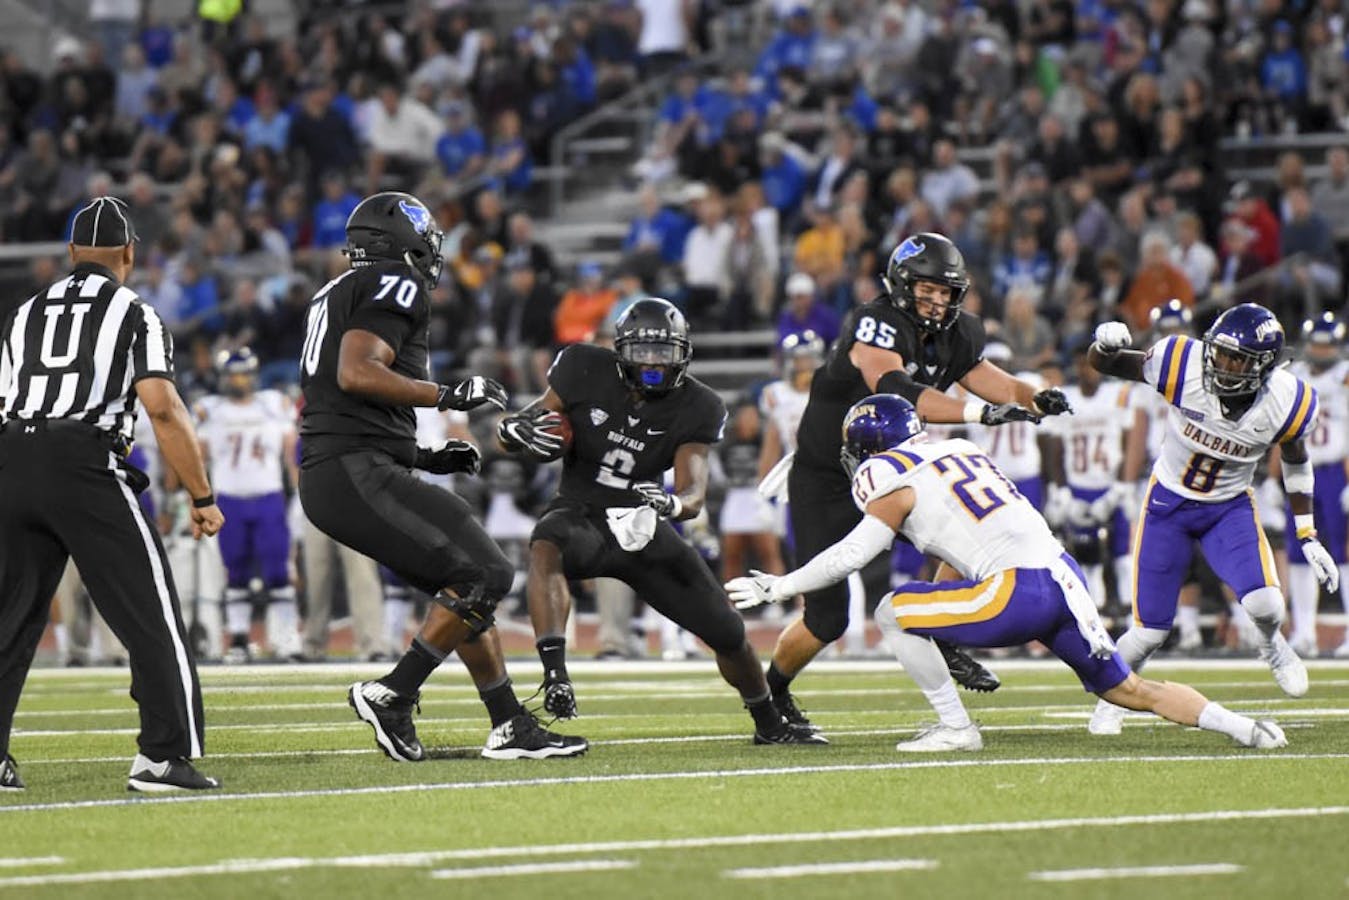 UB Bulls drop opening game to Albany 22-16 - The Spectrum